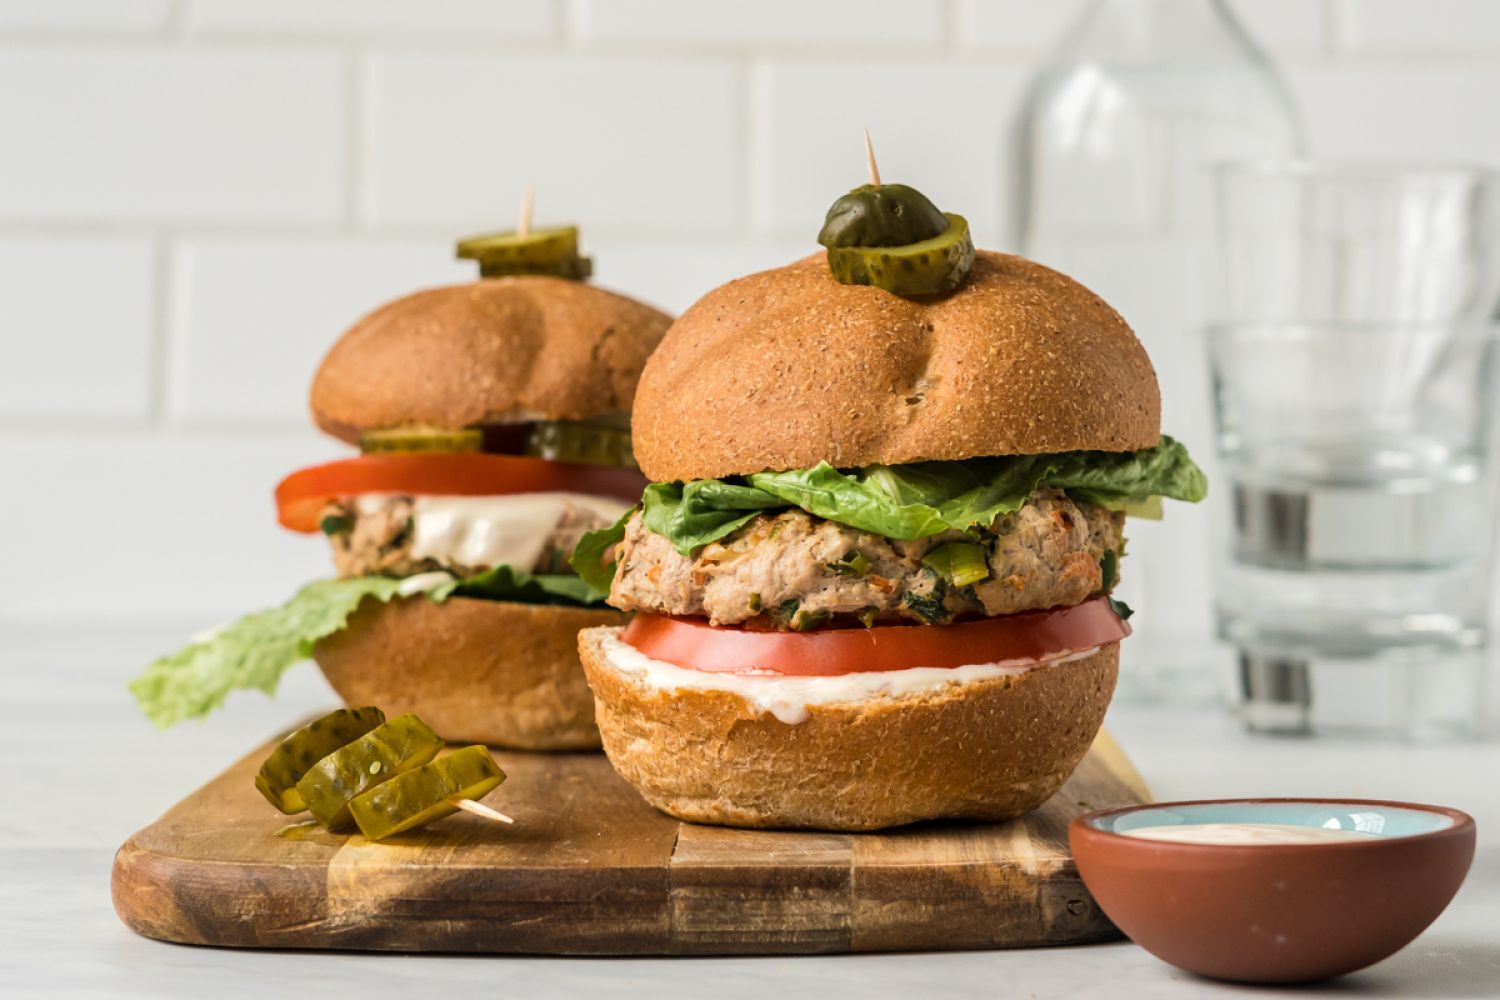 Asian turkey burgers with lettuce, tomato, and sweet chili yogurt sauce on two buns,